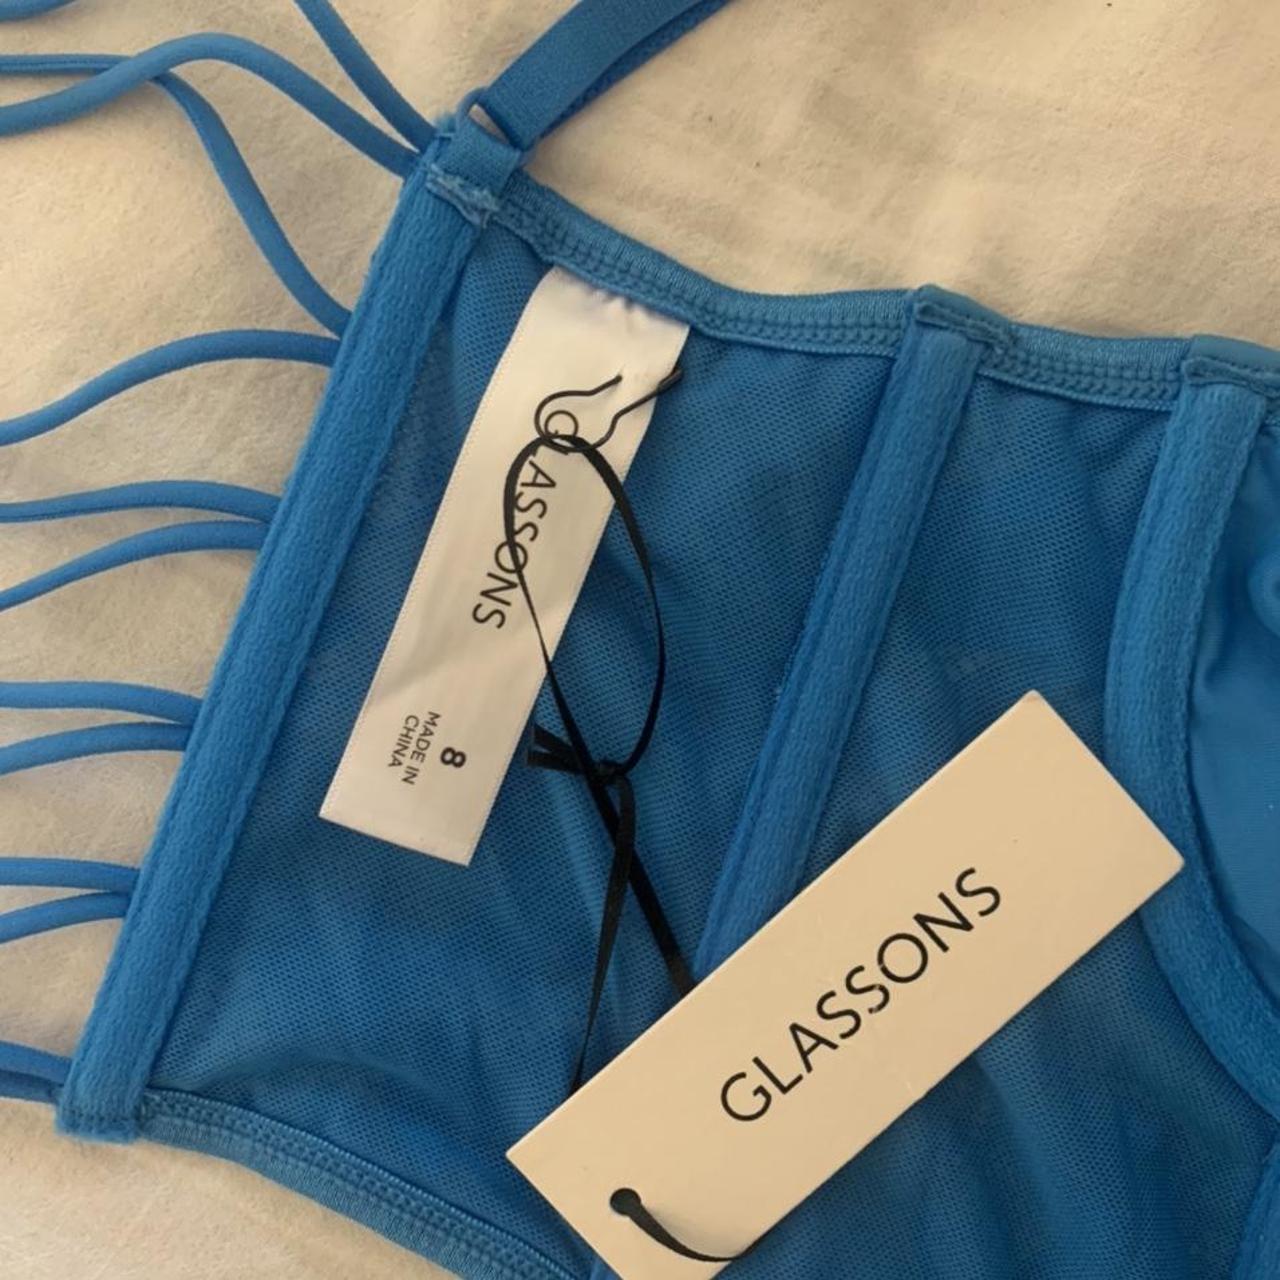 BRAND NEW - TAG still attached - Size 8 - Glassons - Depop